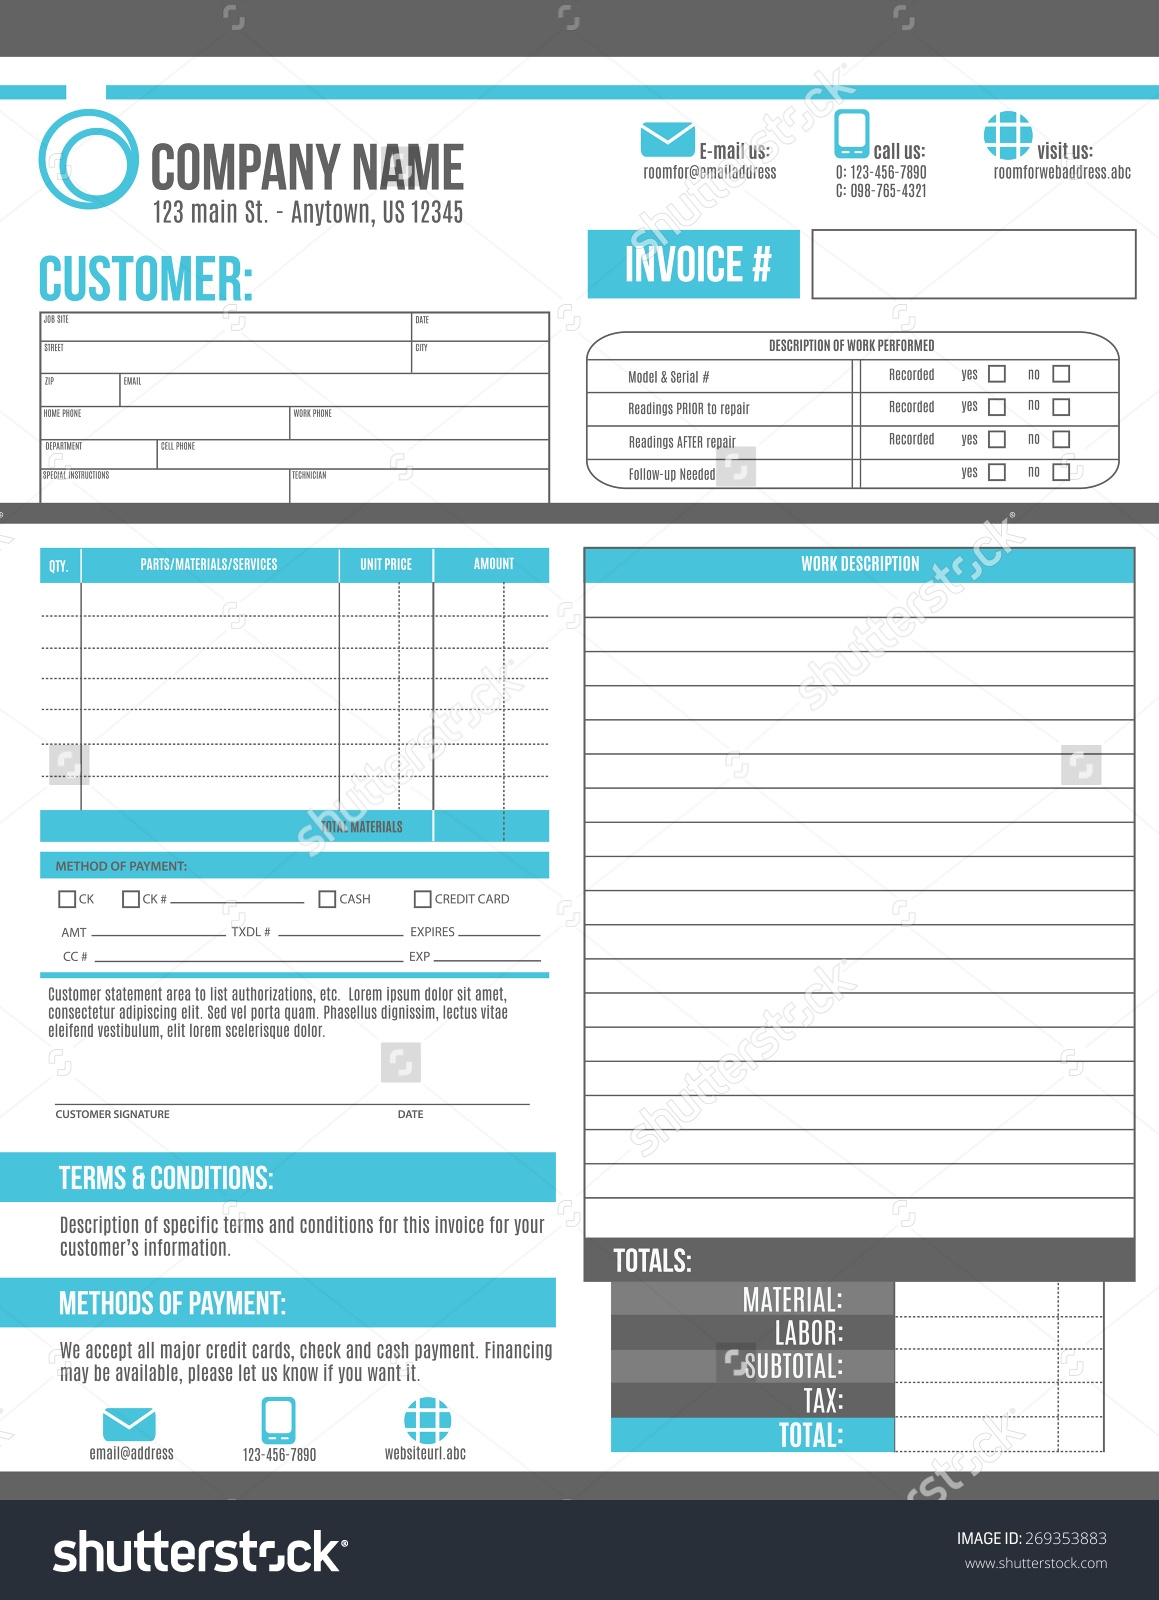 order template work order invoice template invoice template work order invoice template